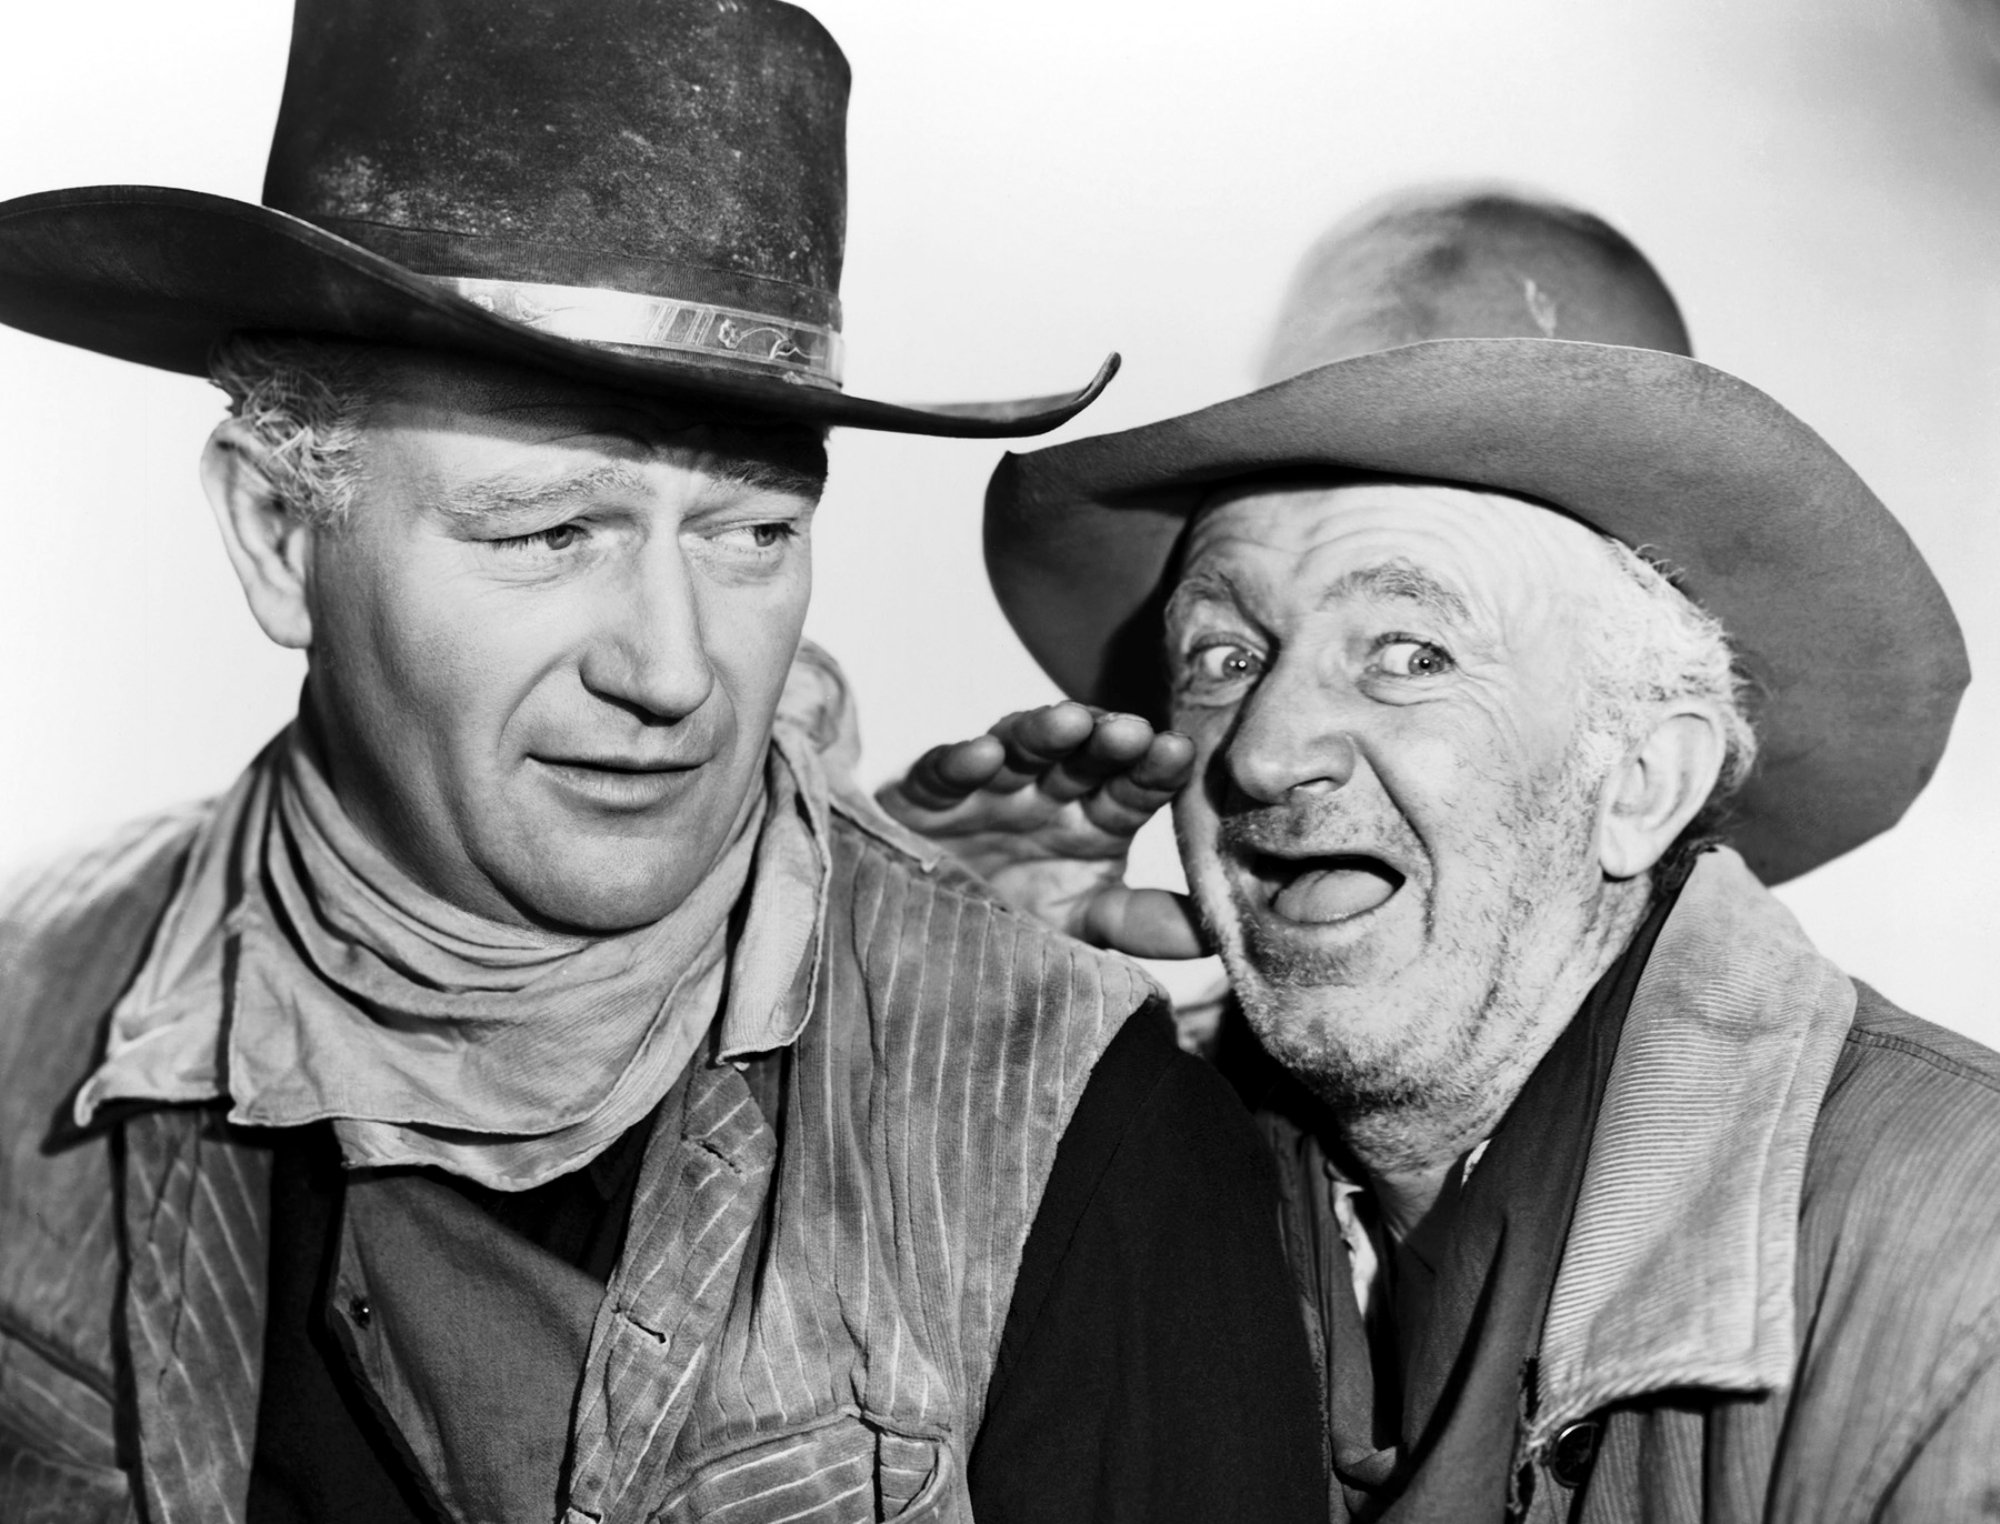 John Wayne and Walter Brennan. Black-and-white photograph of Brennan whispering into Wayne's ear. They're both wearing Western outfits with cowboy hats.